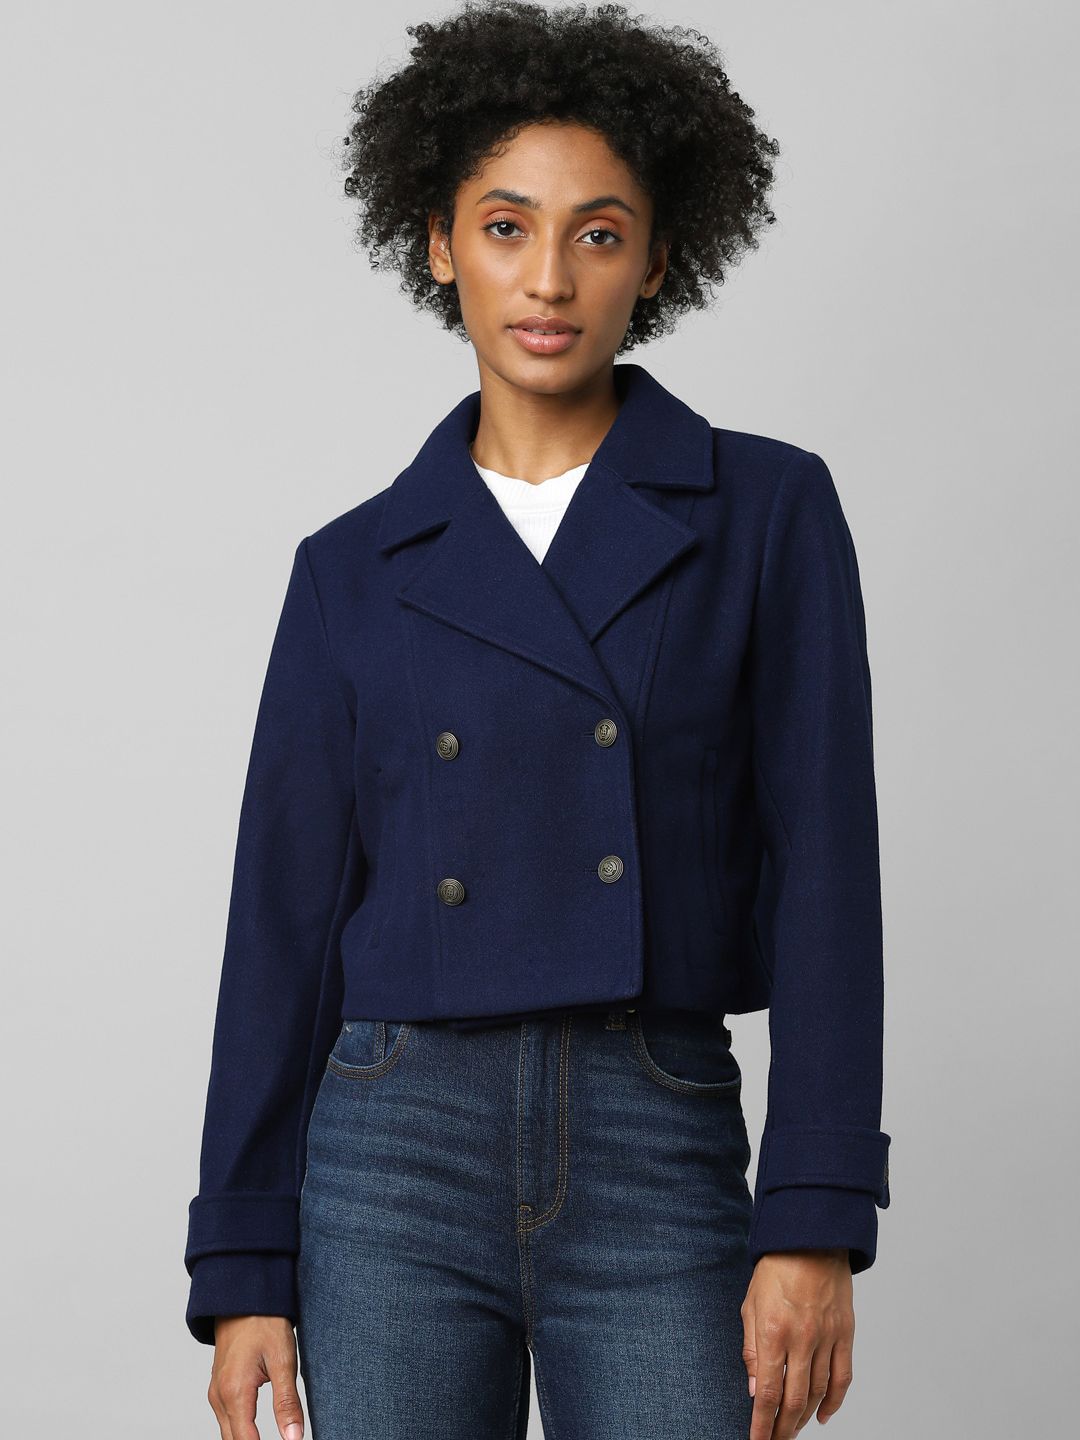 ONLY Women Blue Solid Double-Breasted Cropped Blazer Price in India